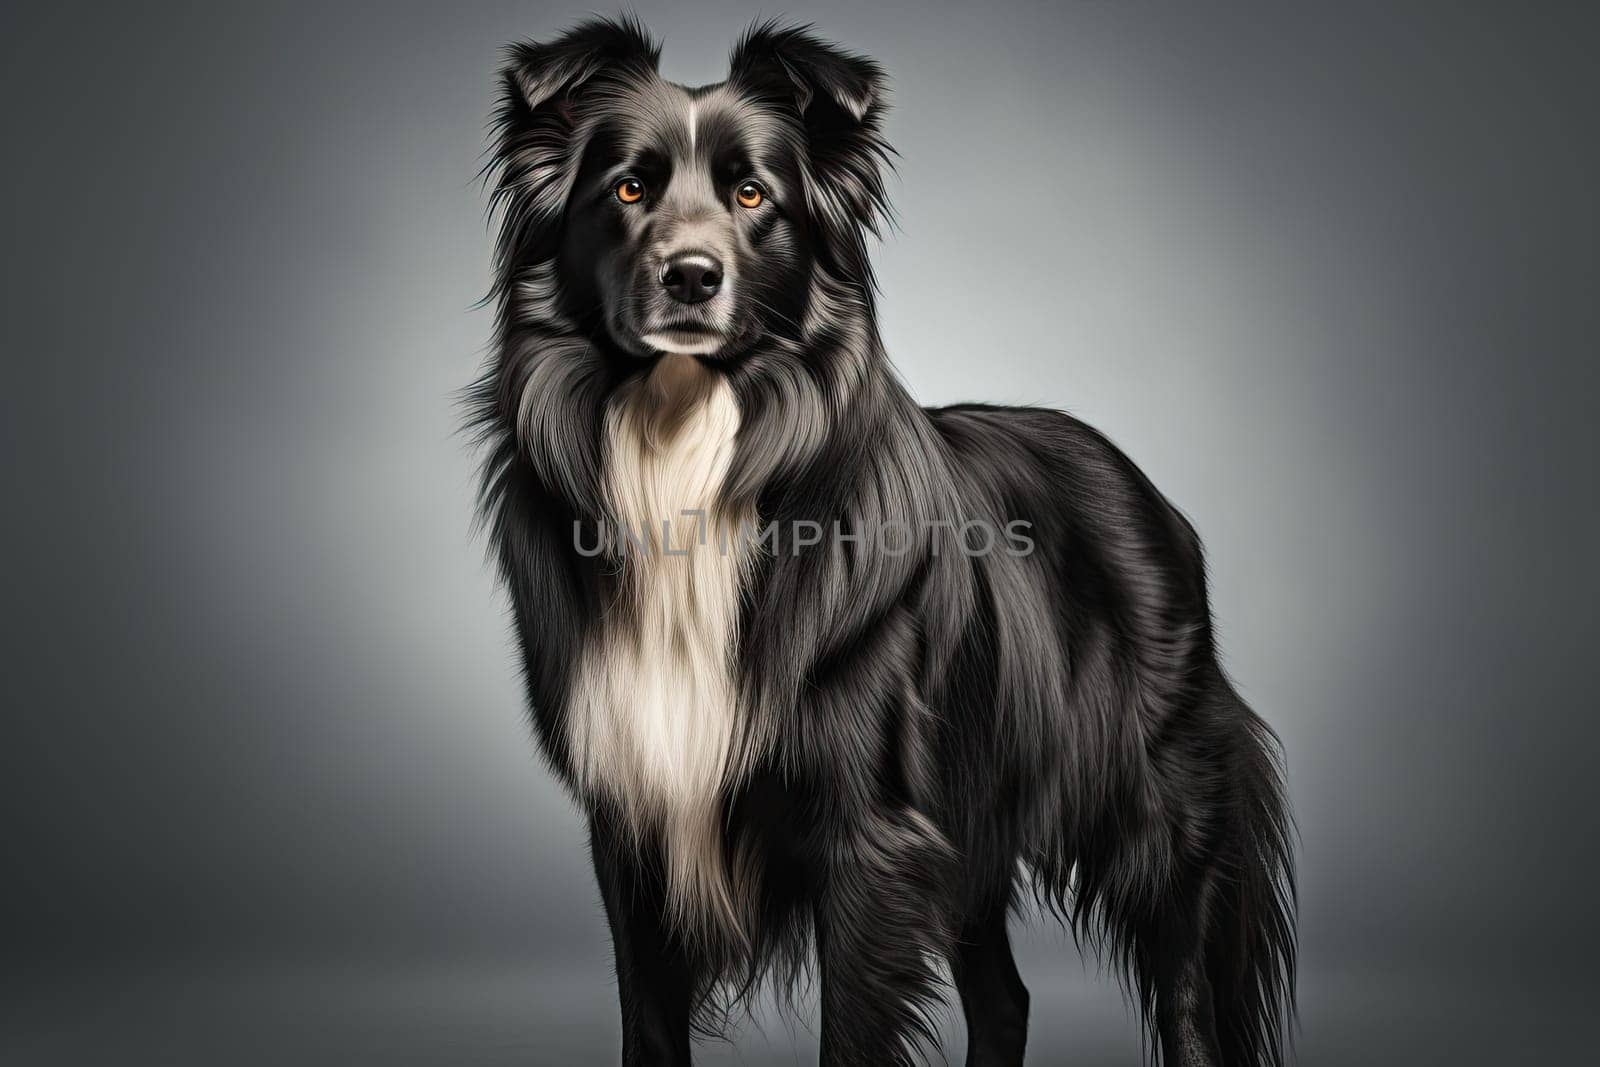 Border collie portrait on gray background, banner and copy space, dog front view.